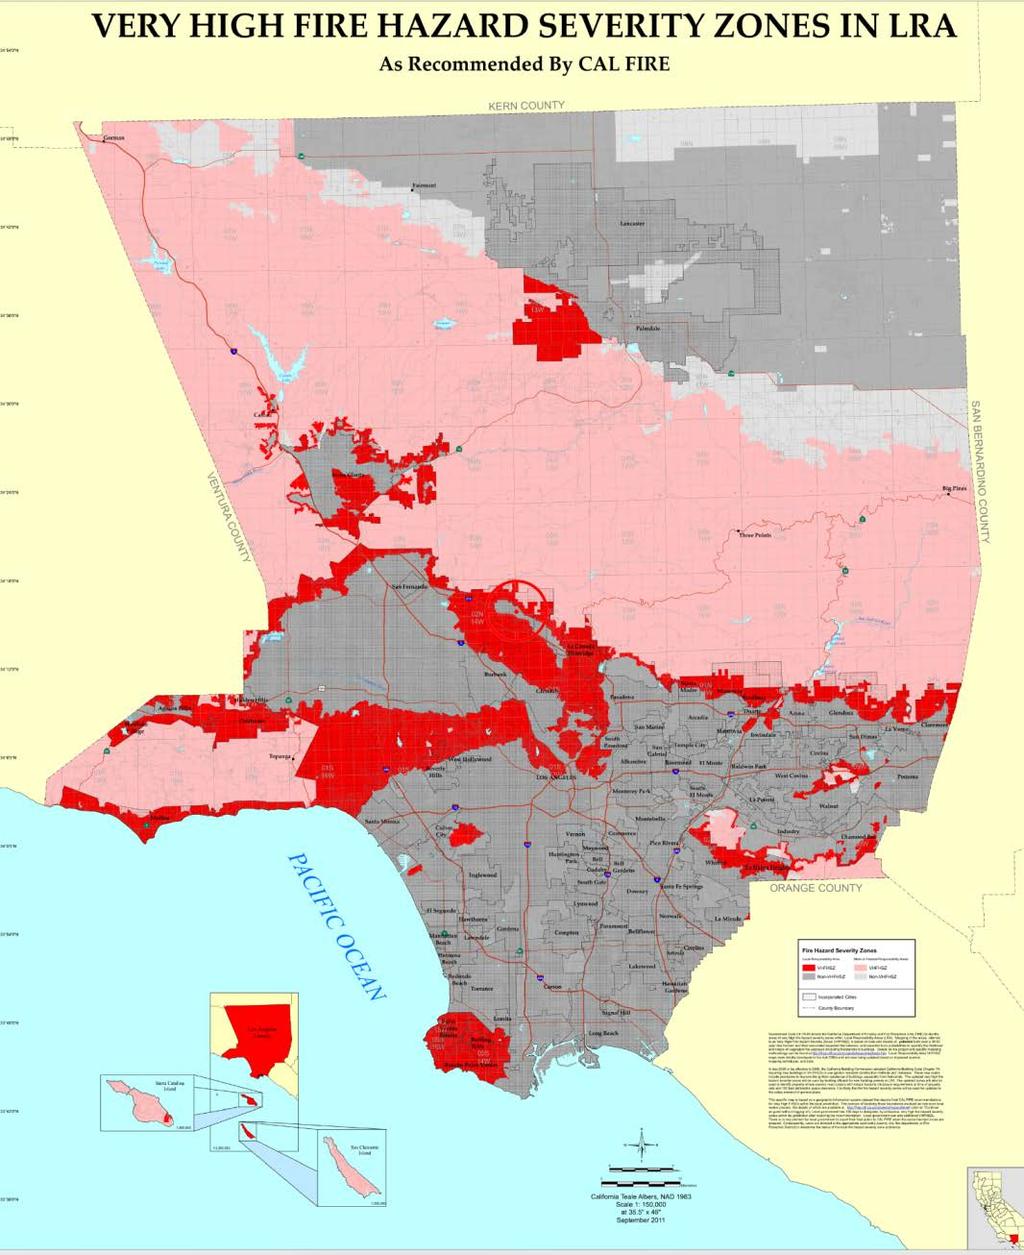 LACFD is directly responsible for wildfire prevention and suppression on approximately 15% of the total VHFHSZ land in Los Angeles County.